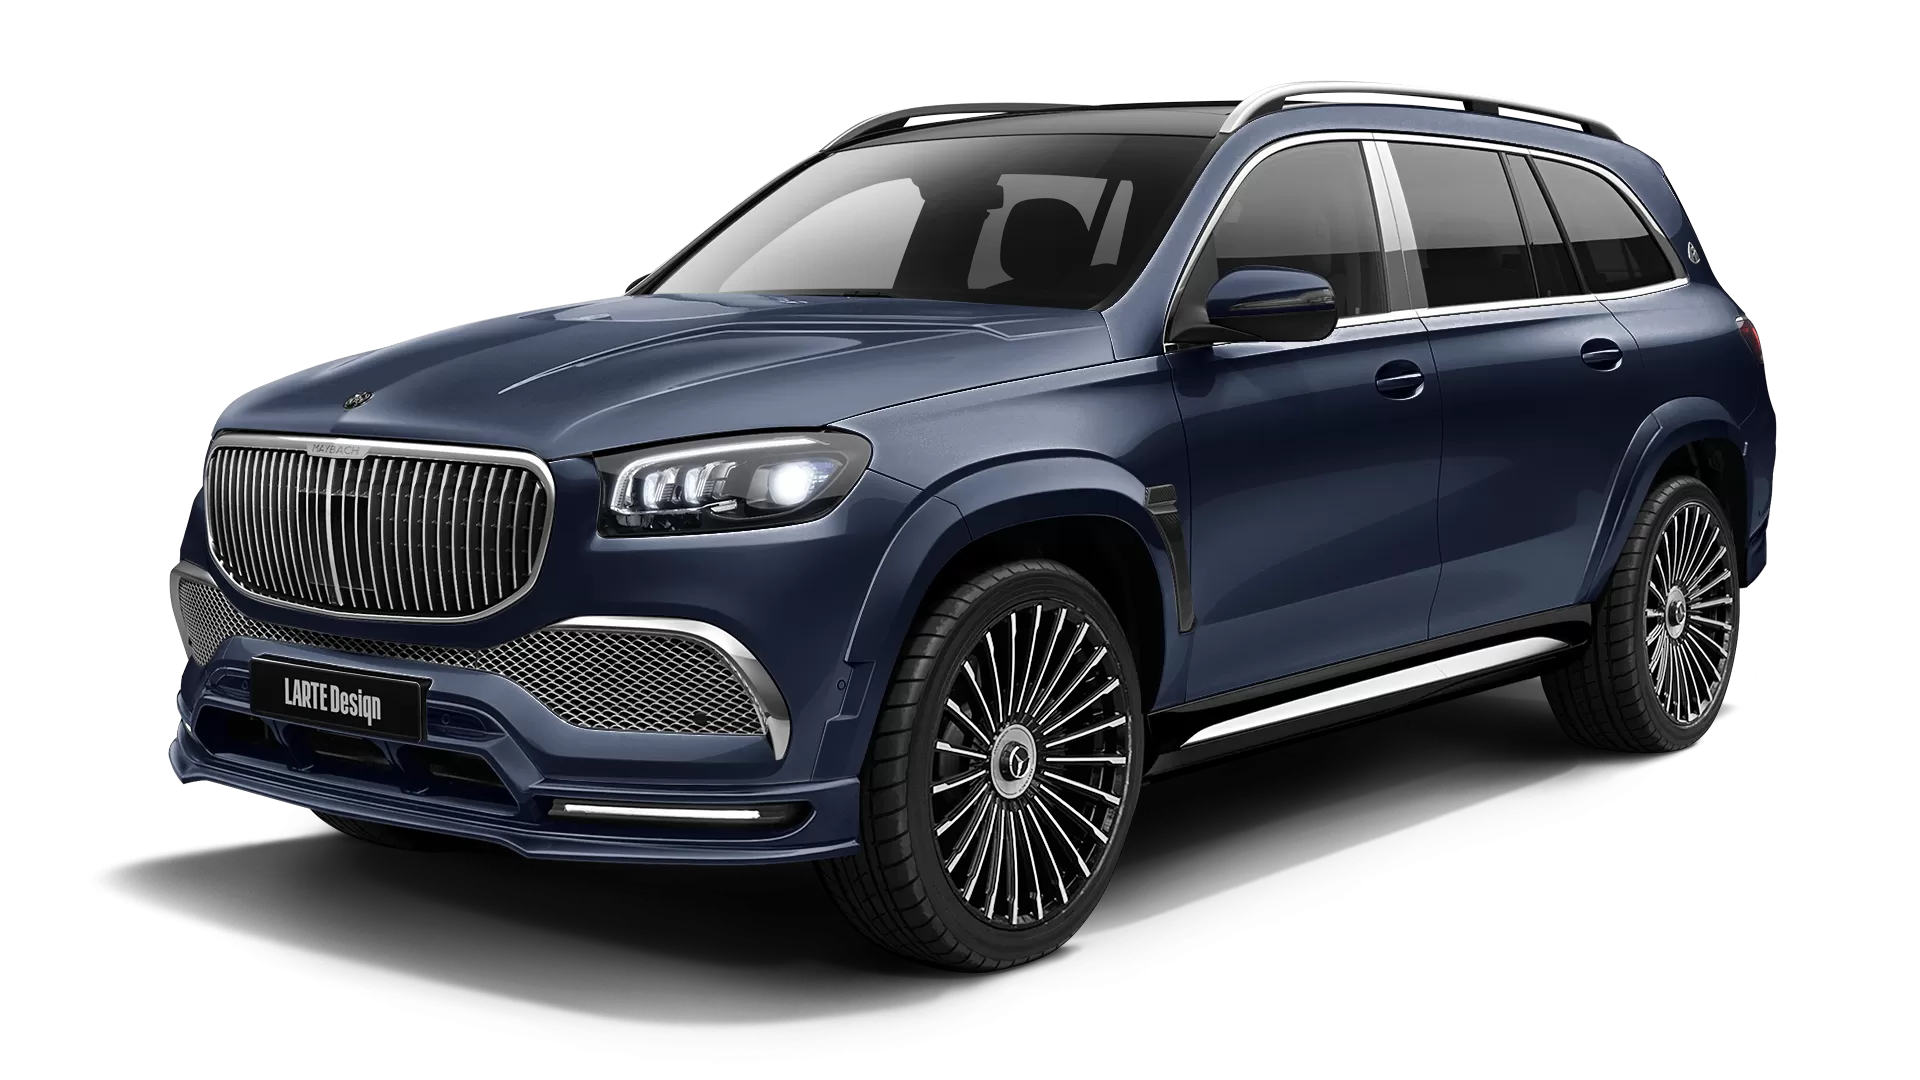 Mercedes Maybach GLS 600 with painted body kit: front view shown in Cavansite Blue